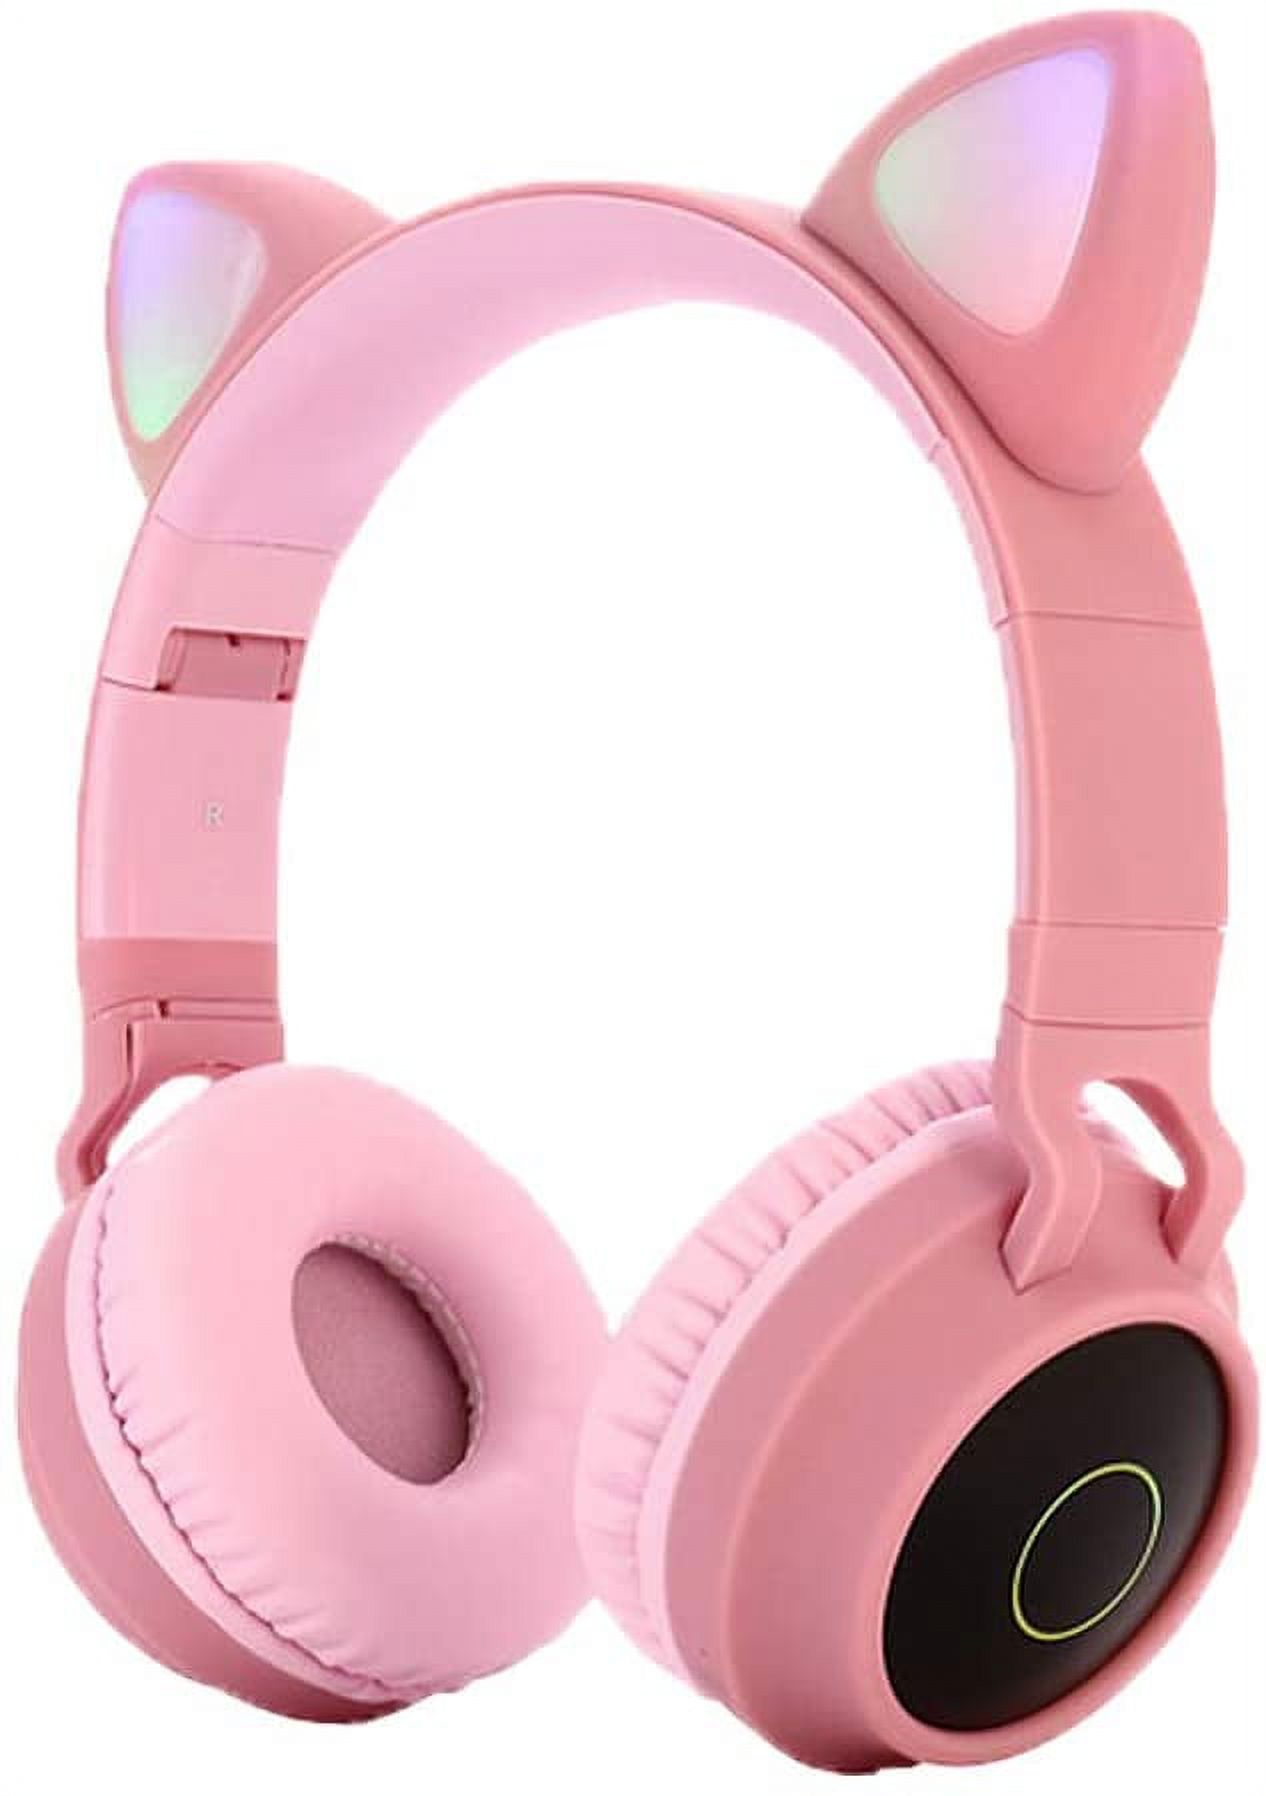 Kids Bluetooth 5.0 Cat Ear Headphones Foldable On-Ear Stereo Wireless Headset with Mic LED Light and Volume Control Support FM Radio/TF Card/Aux in Compatible with Smartphones PC Tablet-Pink - image 2 of 10